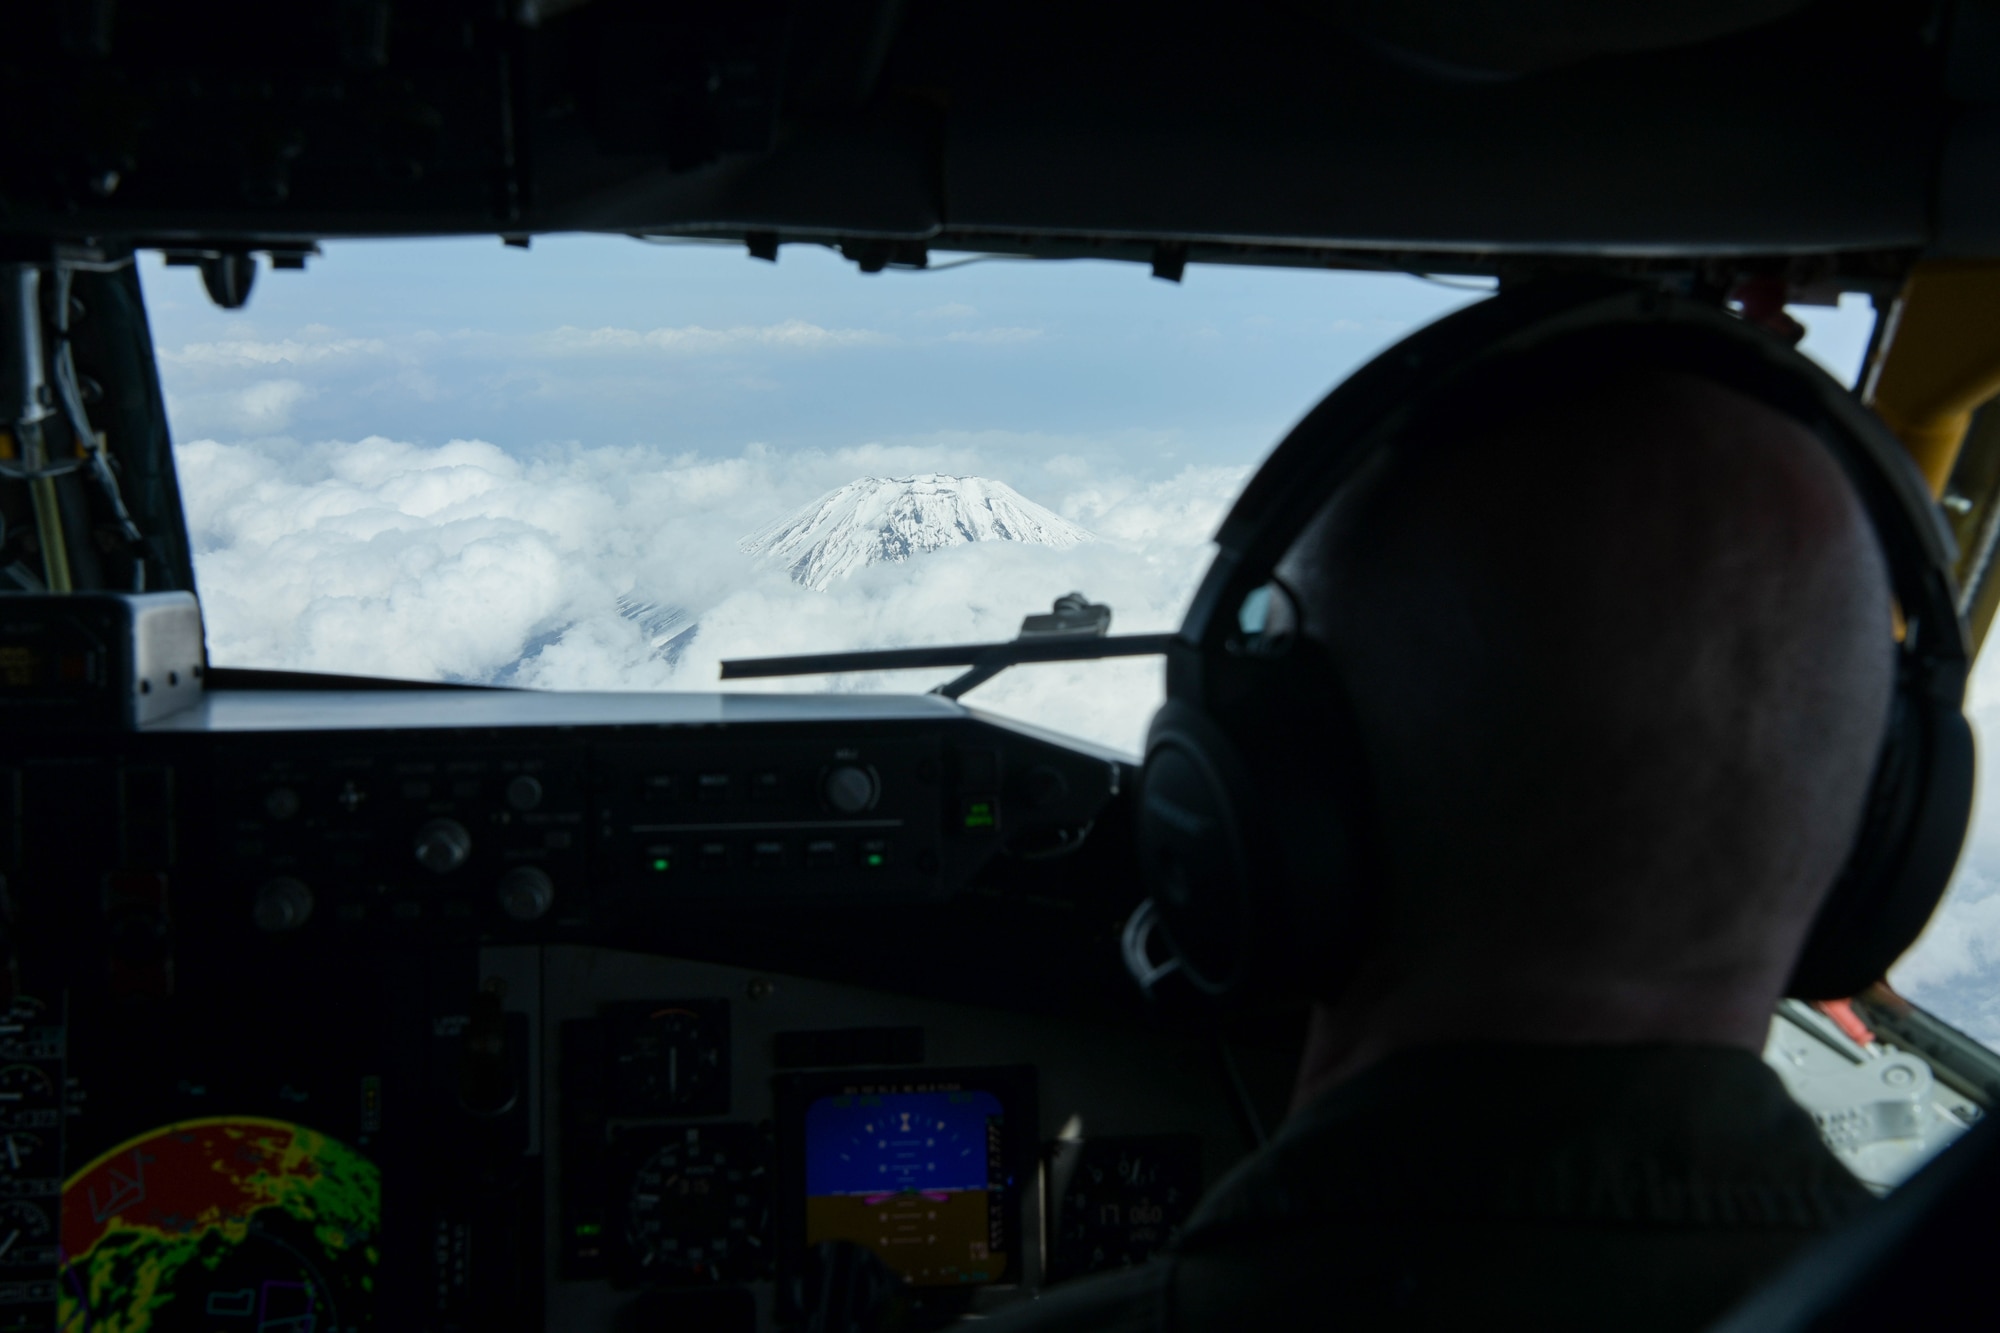 U.S. Air Force Capt. Trevor Gardner, 909th Air Refueling Squadron KC-135 Stratotanker pilot, looks at Mt. Fuji, Japan, April 1, 2021. The 909th ARS’s mission is to refuel aircraft in the air, enabling Pacific Air Forces to maintain a free and open Indo-Pacific. (U.S. Air Force photo by Senior Airman Rebeckah Medeiros)